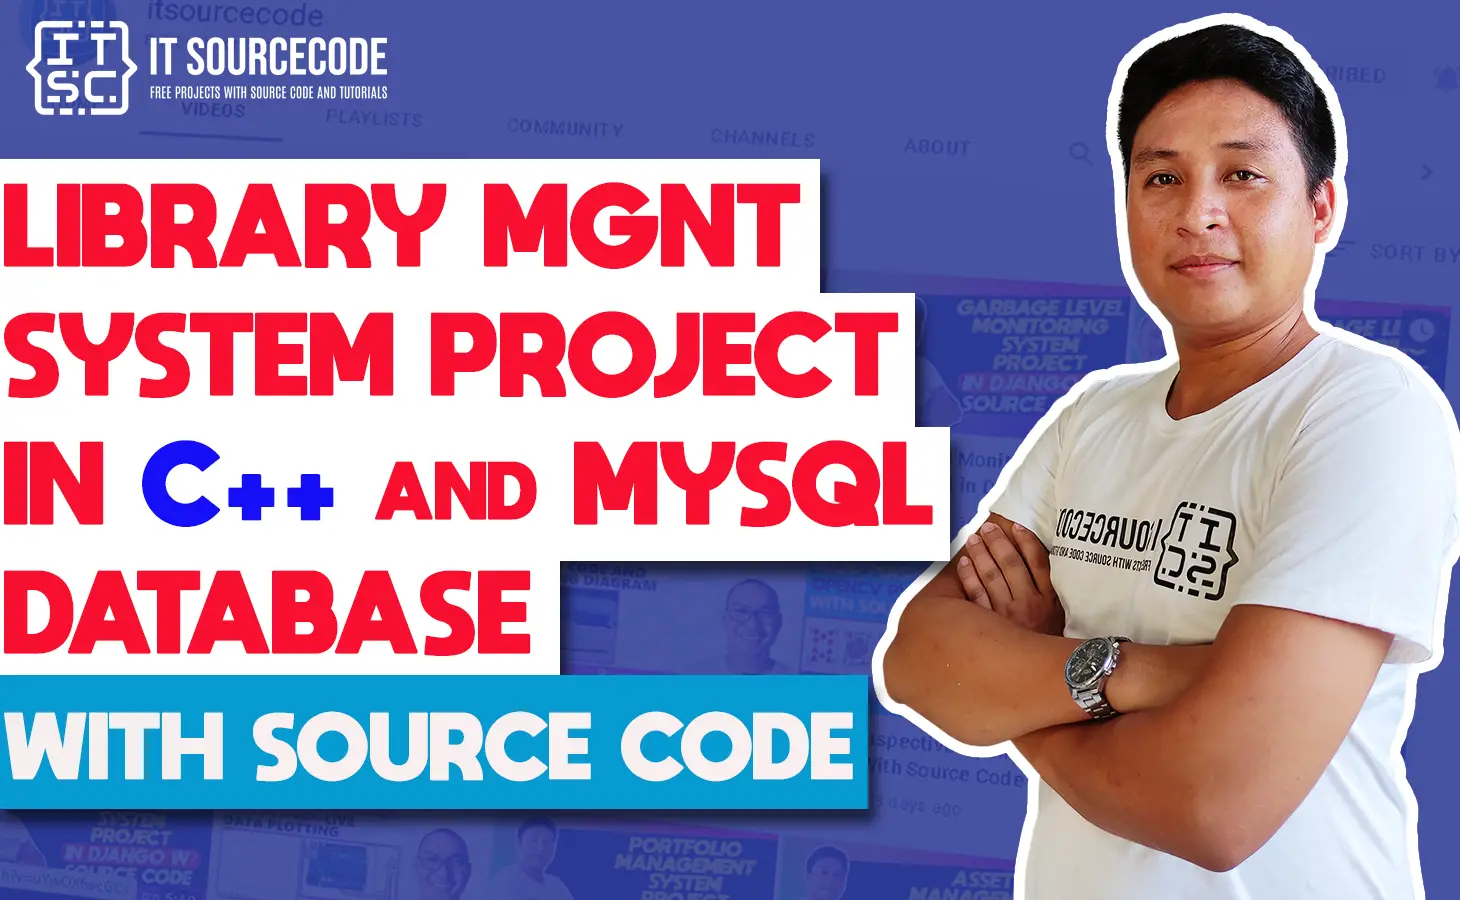 Library Management System Project in C++ and MySQL Database